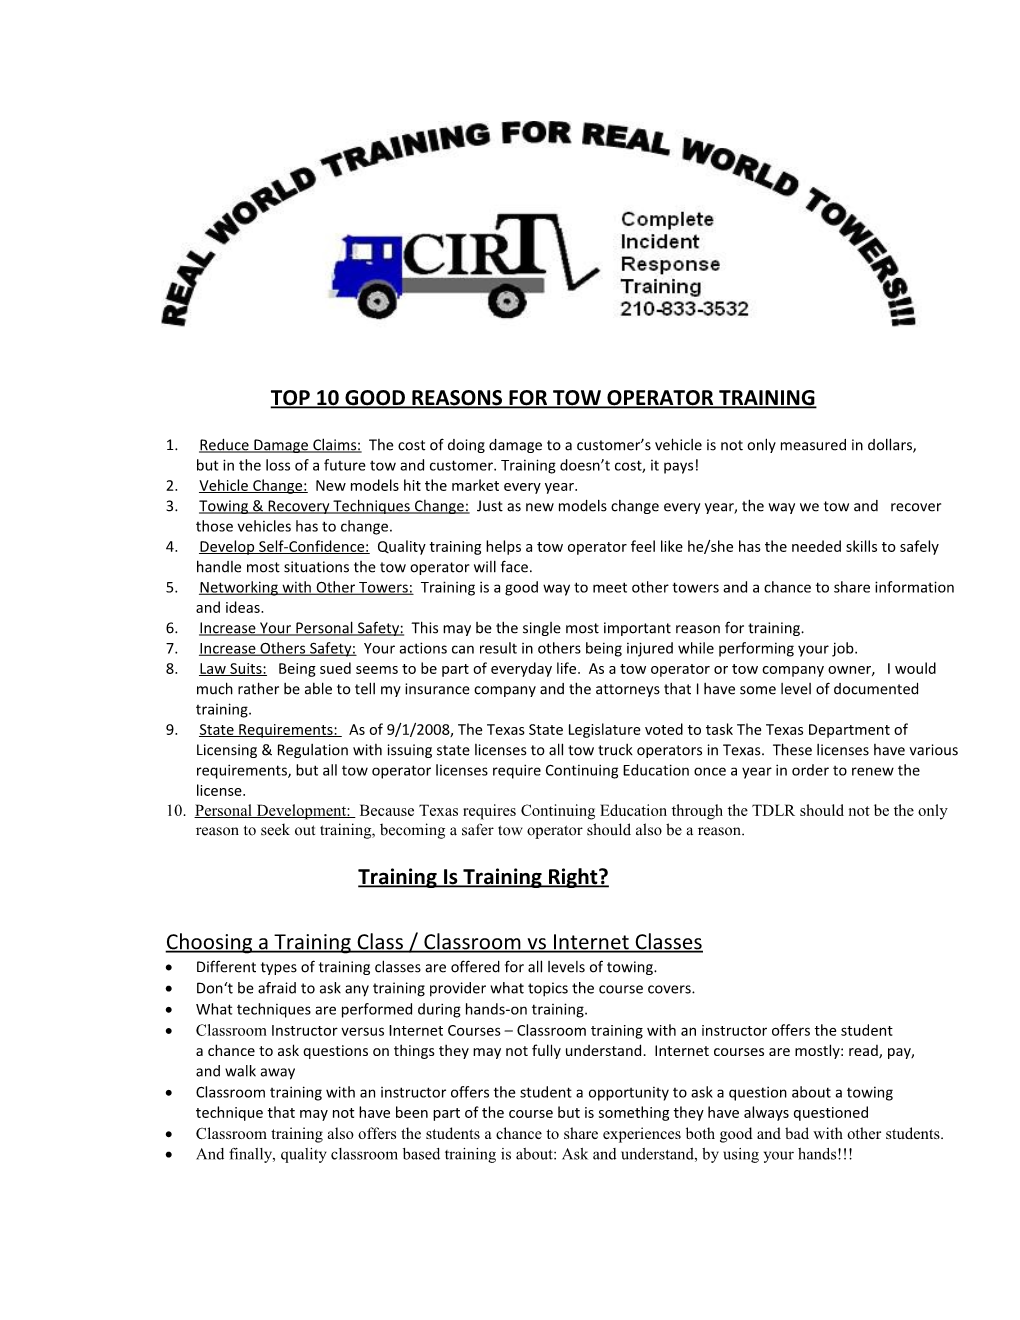 Top 10 Good Reasons for Tow Operator Training